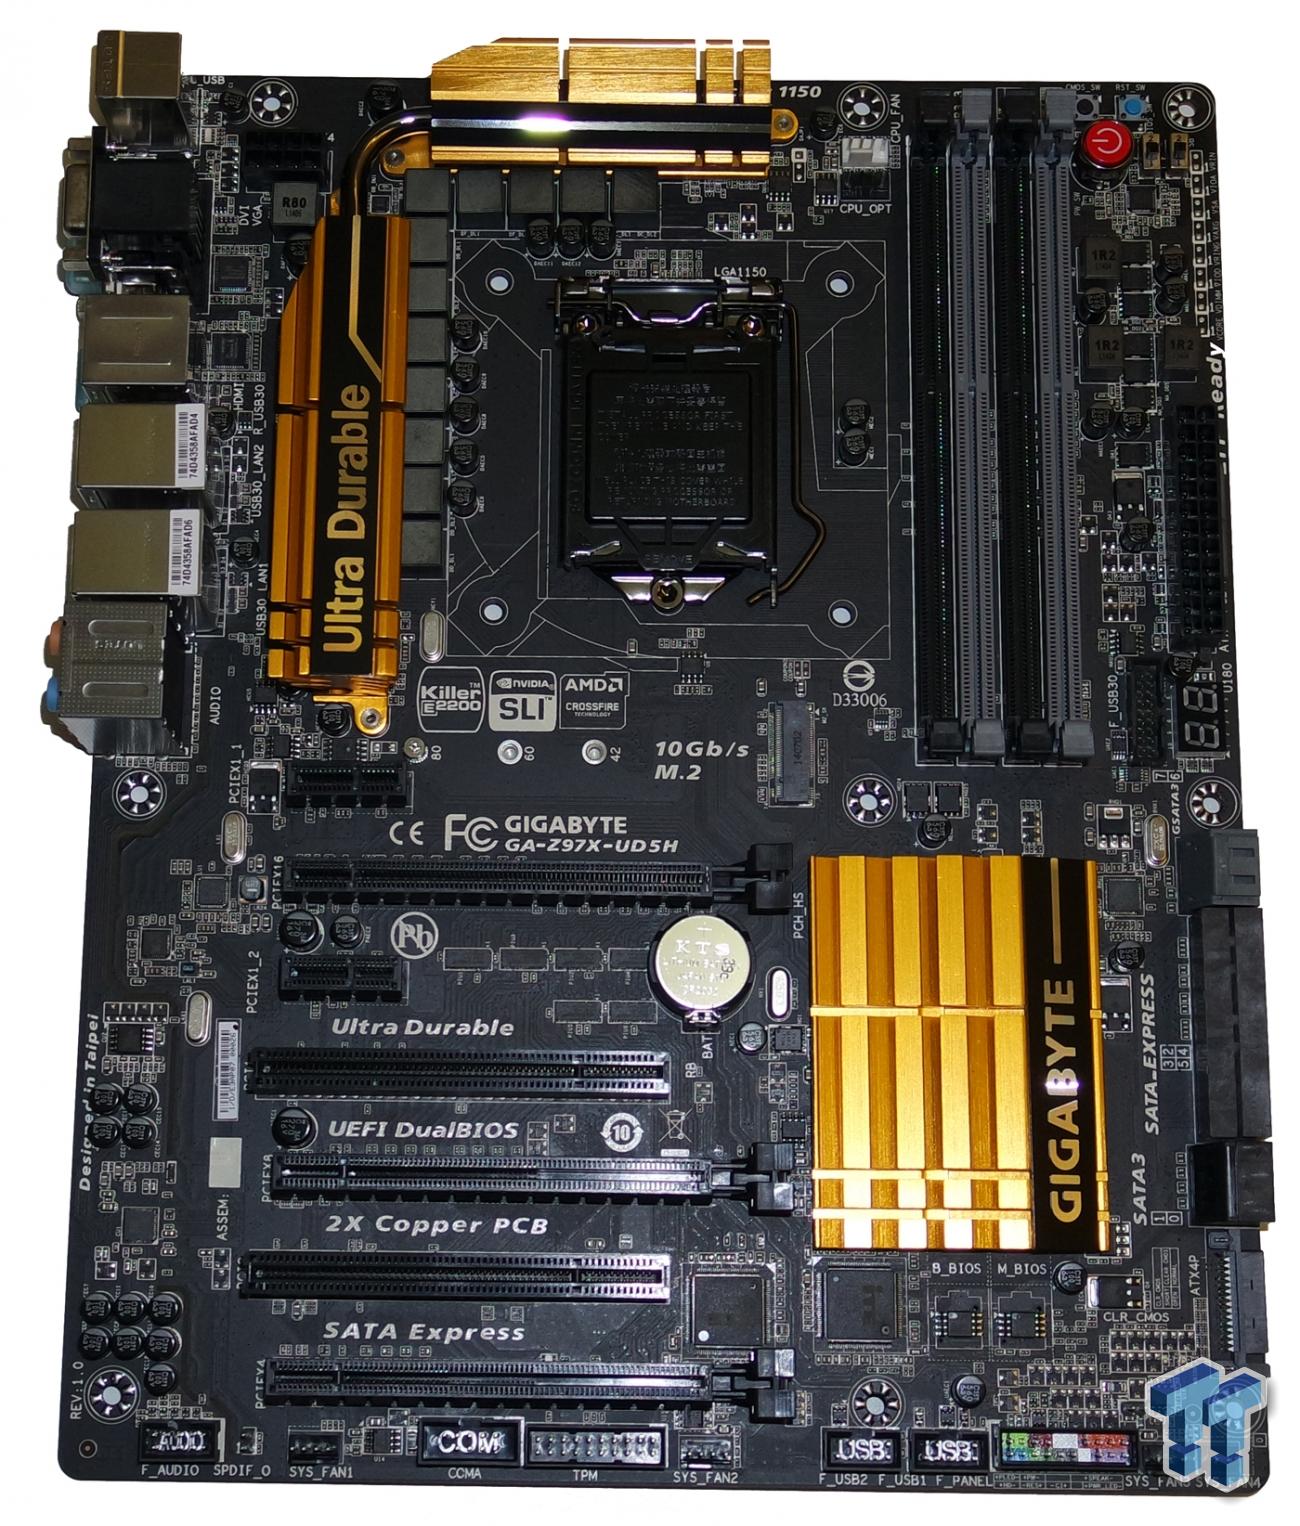 GIGABYTE ZX UD5H Intel Z Motherboard Review